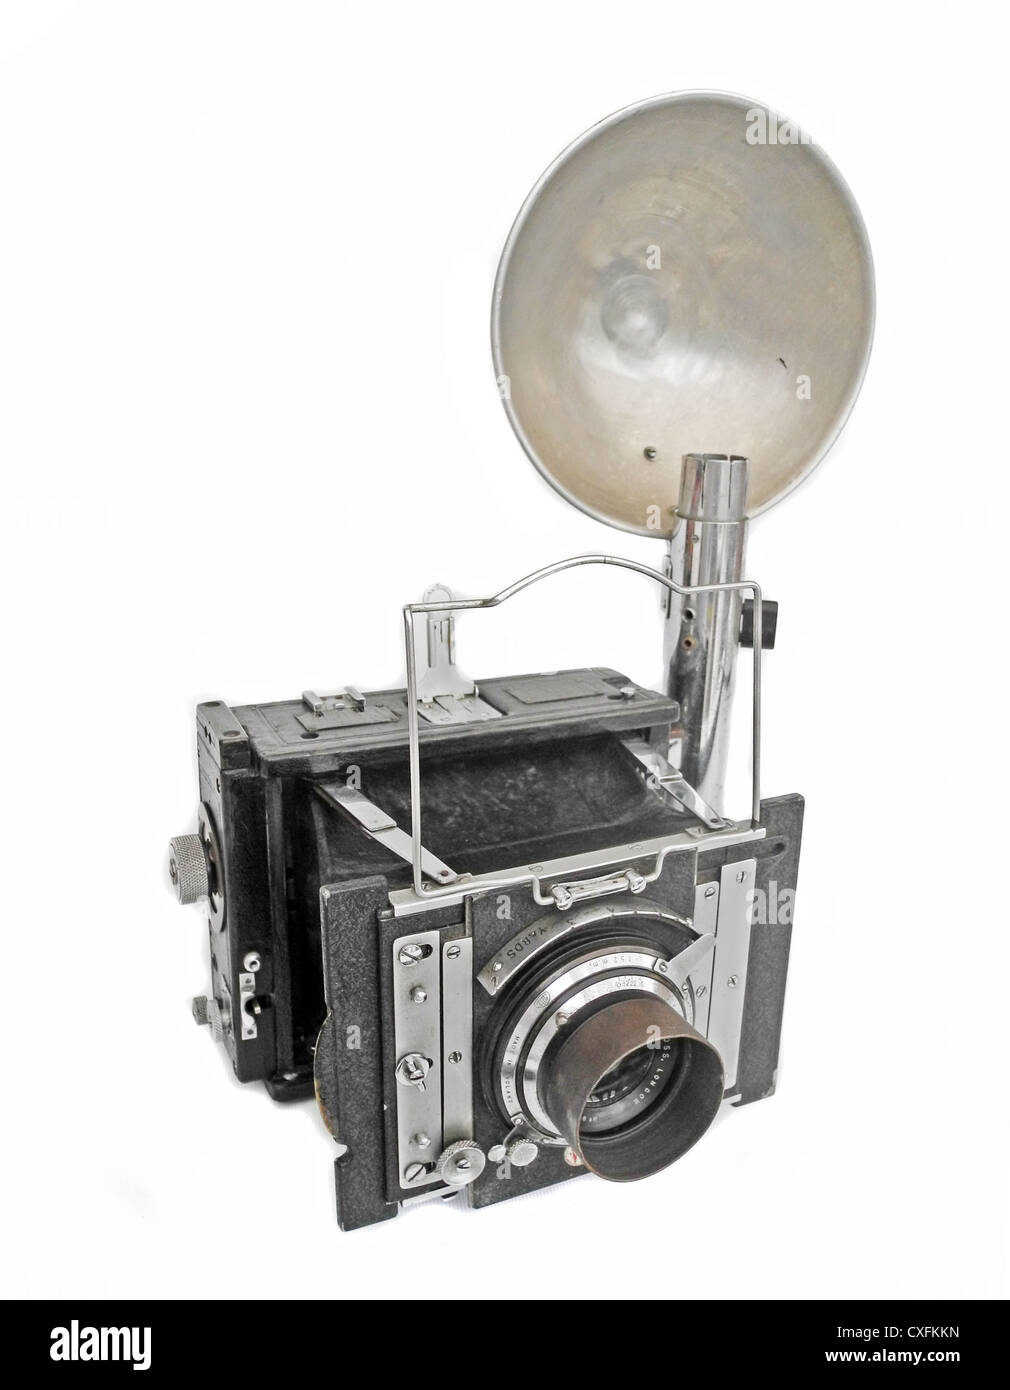 This is a vintage Fleet Street press photographer's camera - a Peeling and Van Neck (VN) 9cmx 12cm plate camera used by photographers between the 1930's and the 1950's PROPERTY RELEASE NOT REQUIRED COMPANY NO LONGER EXISTS Stock Photo